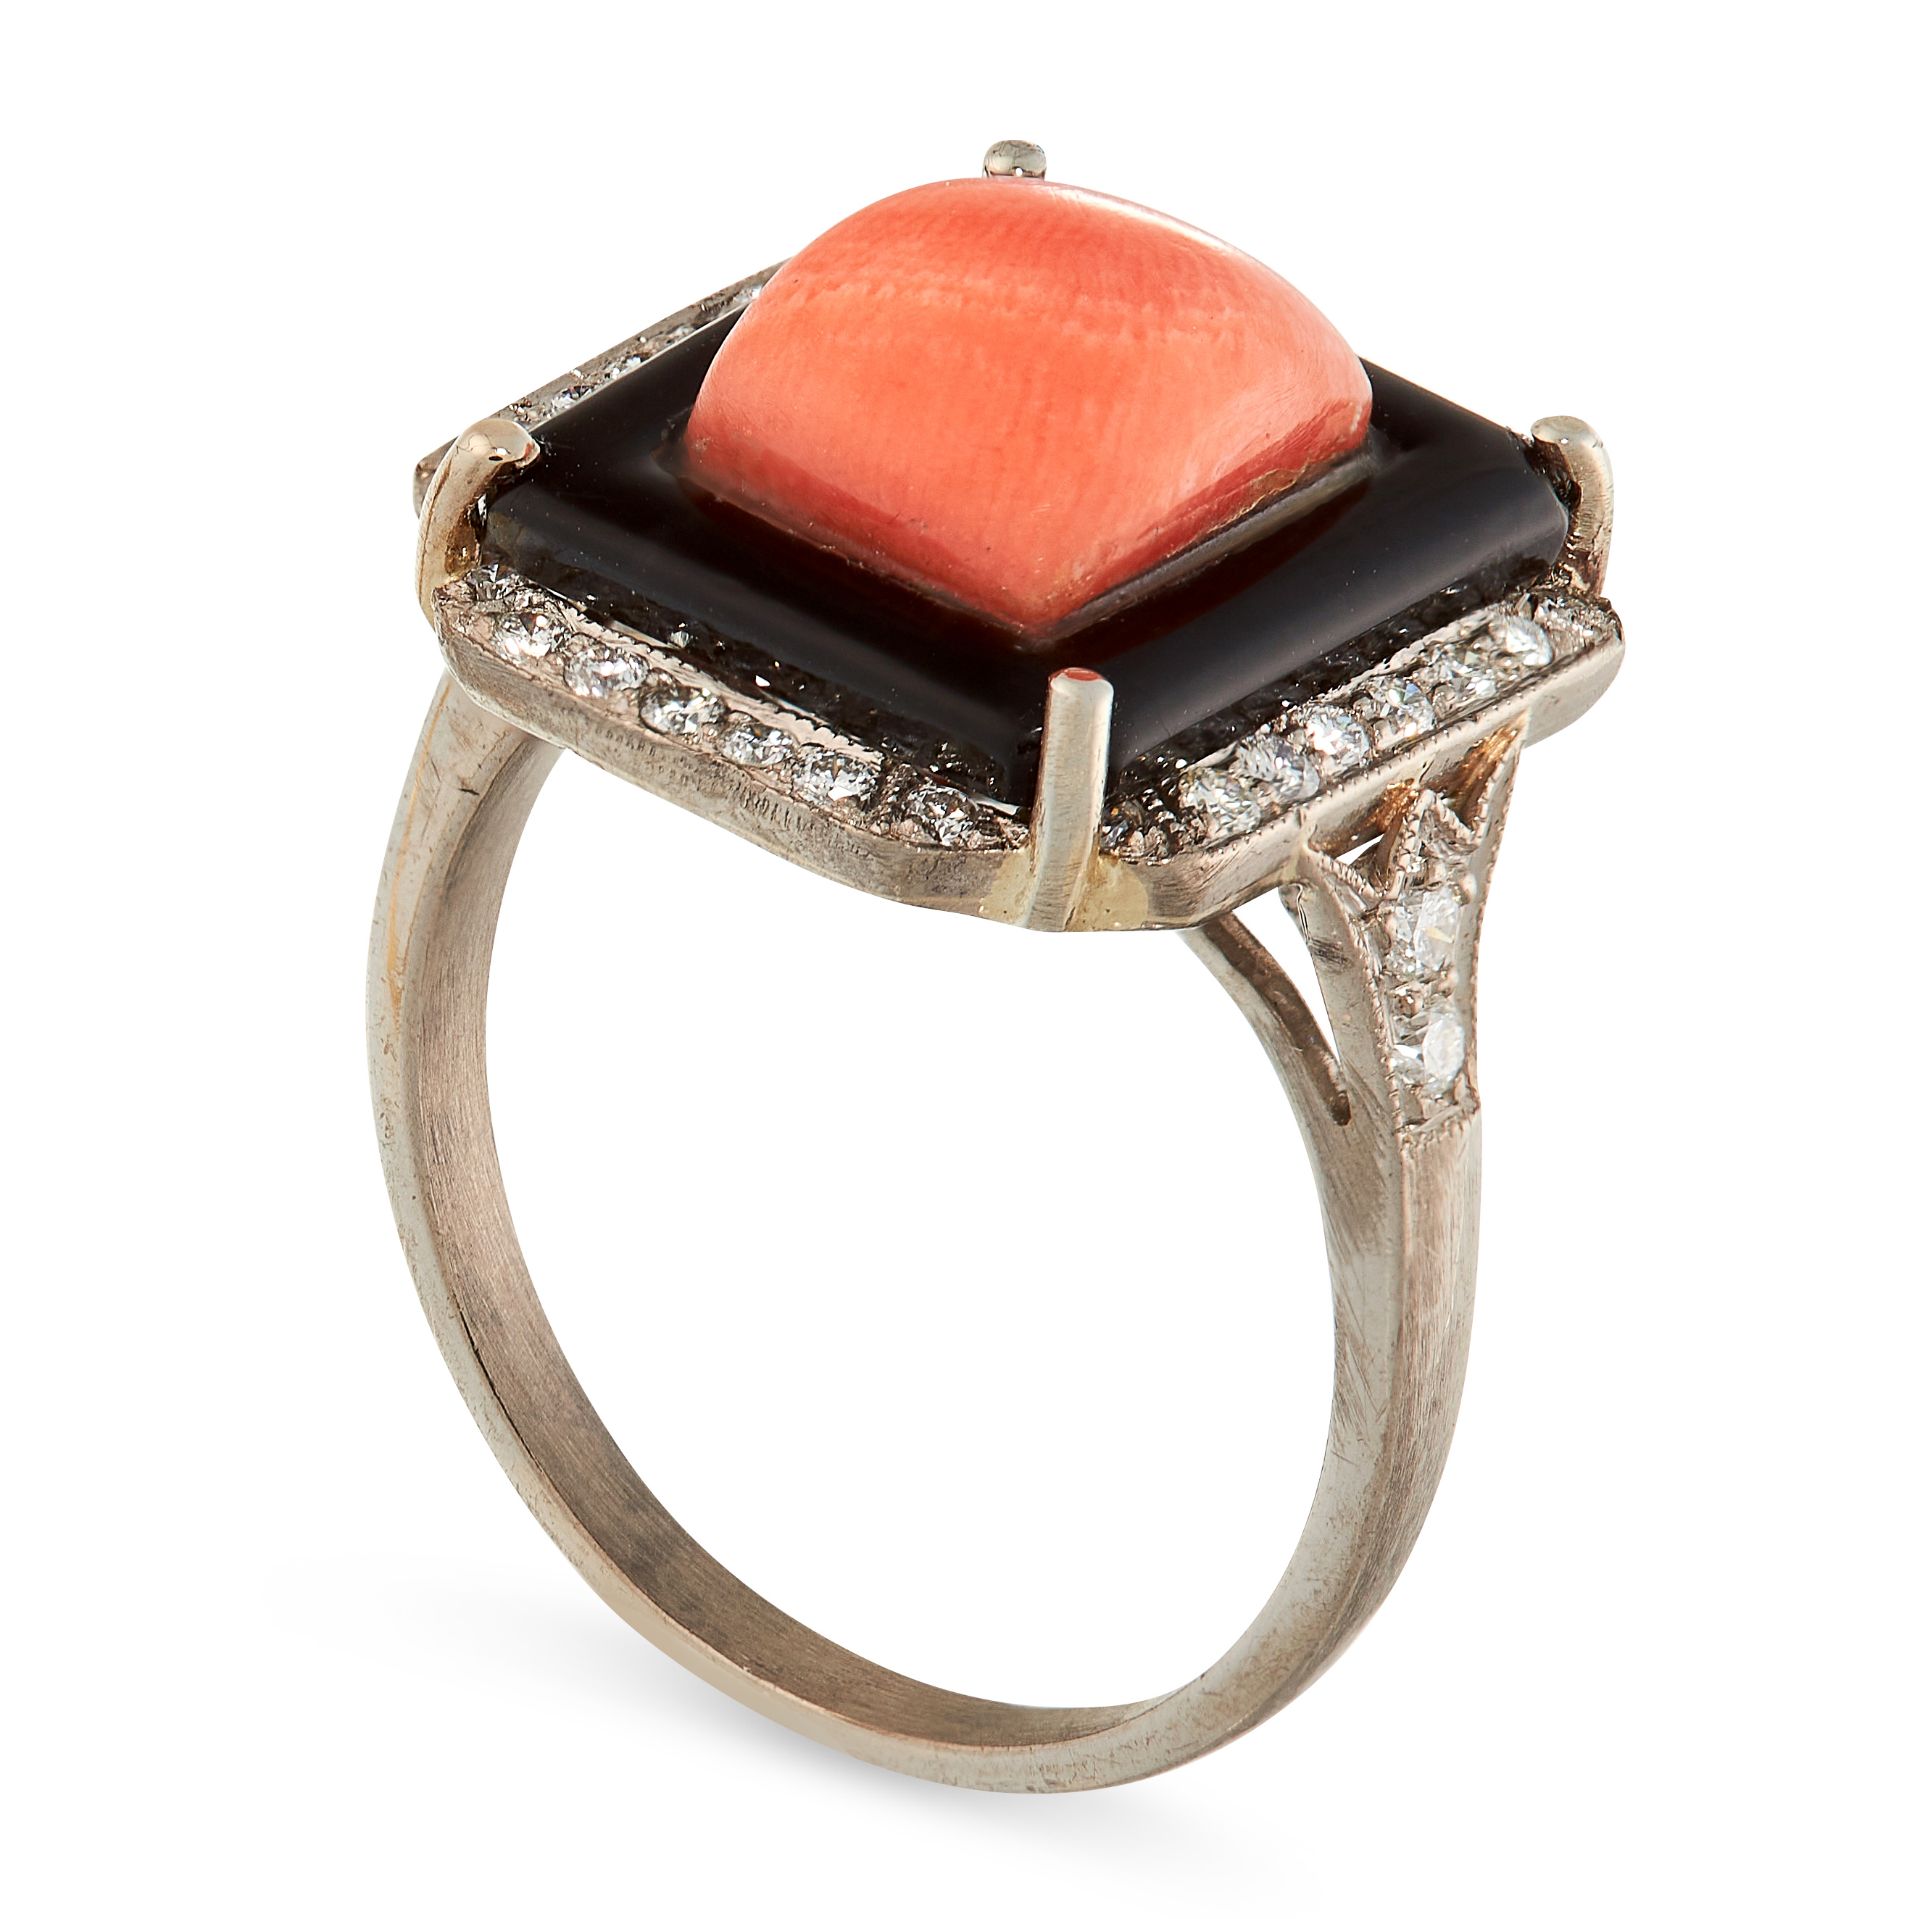 AN ART DECO CORAL, ONYX AND DIAMOND RING in 18ct white gold, set with a central cushion shaped coral - Image 2 of 2